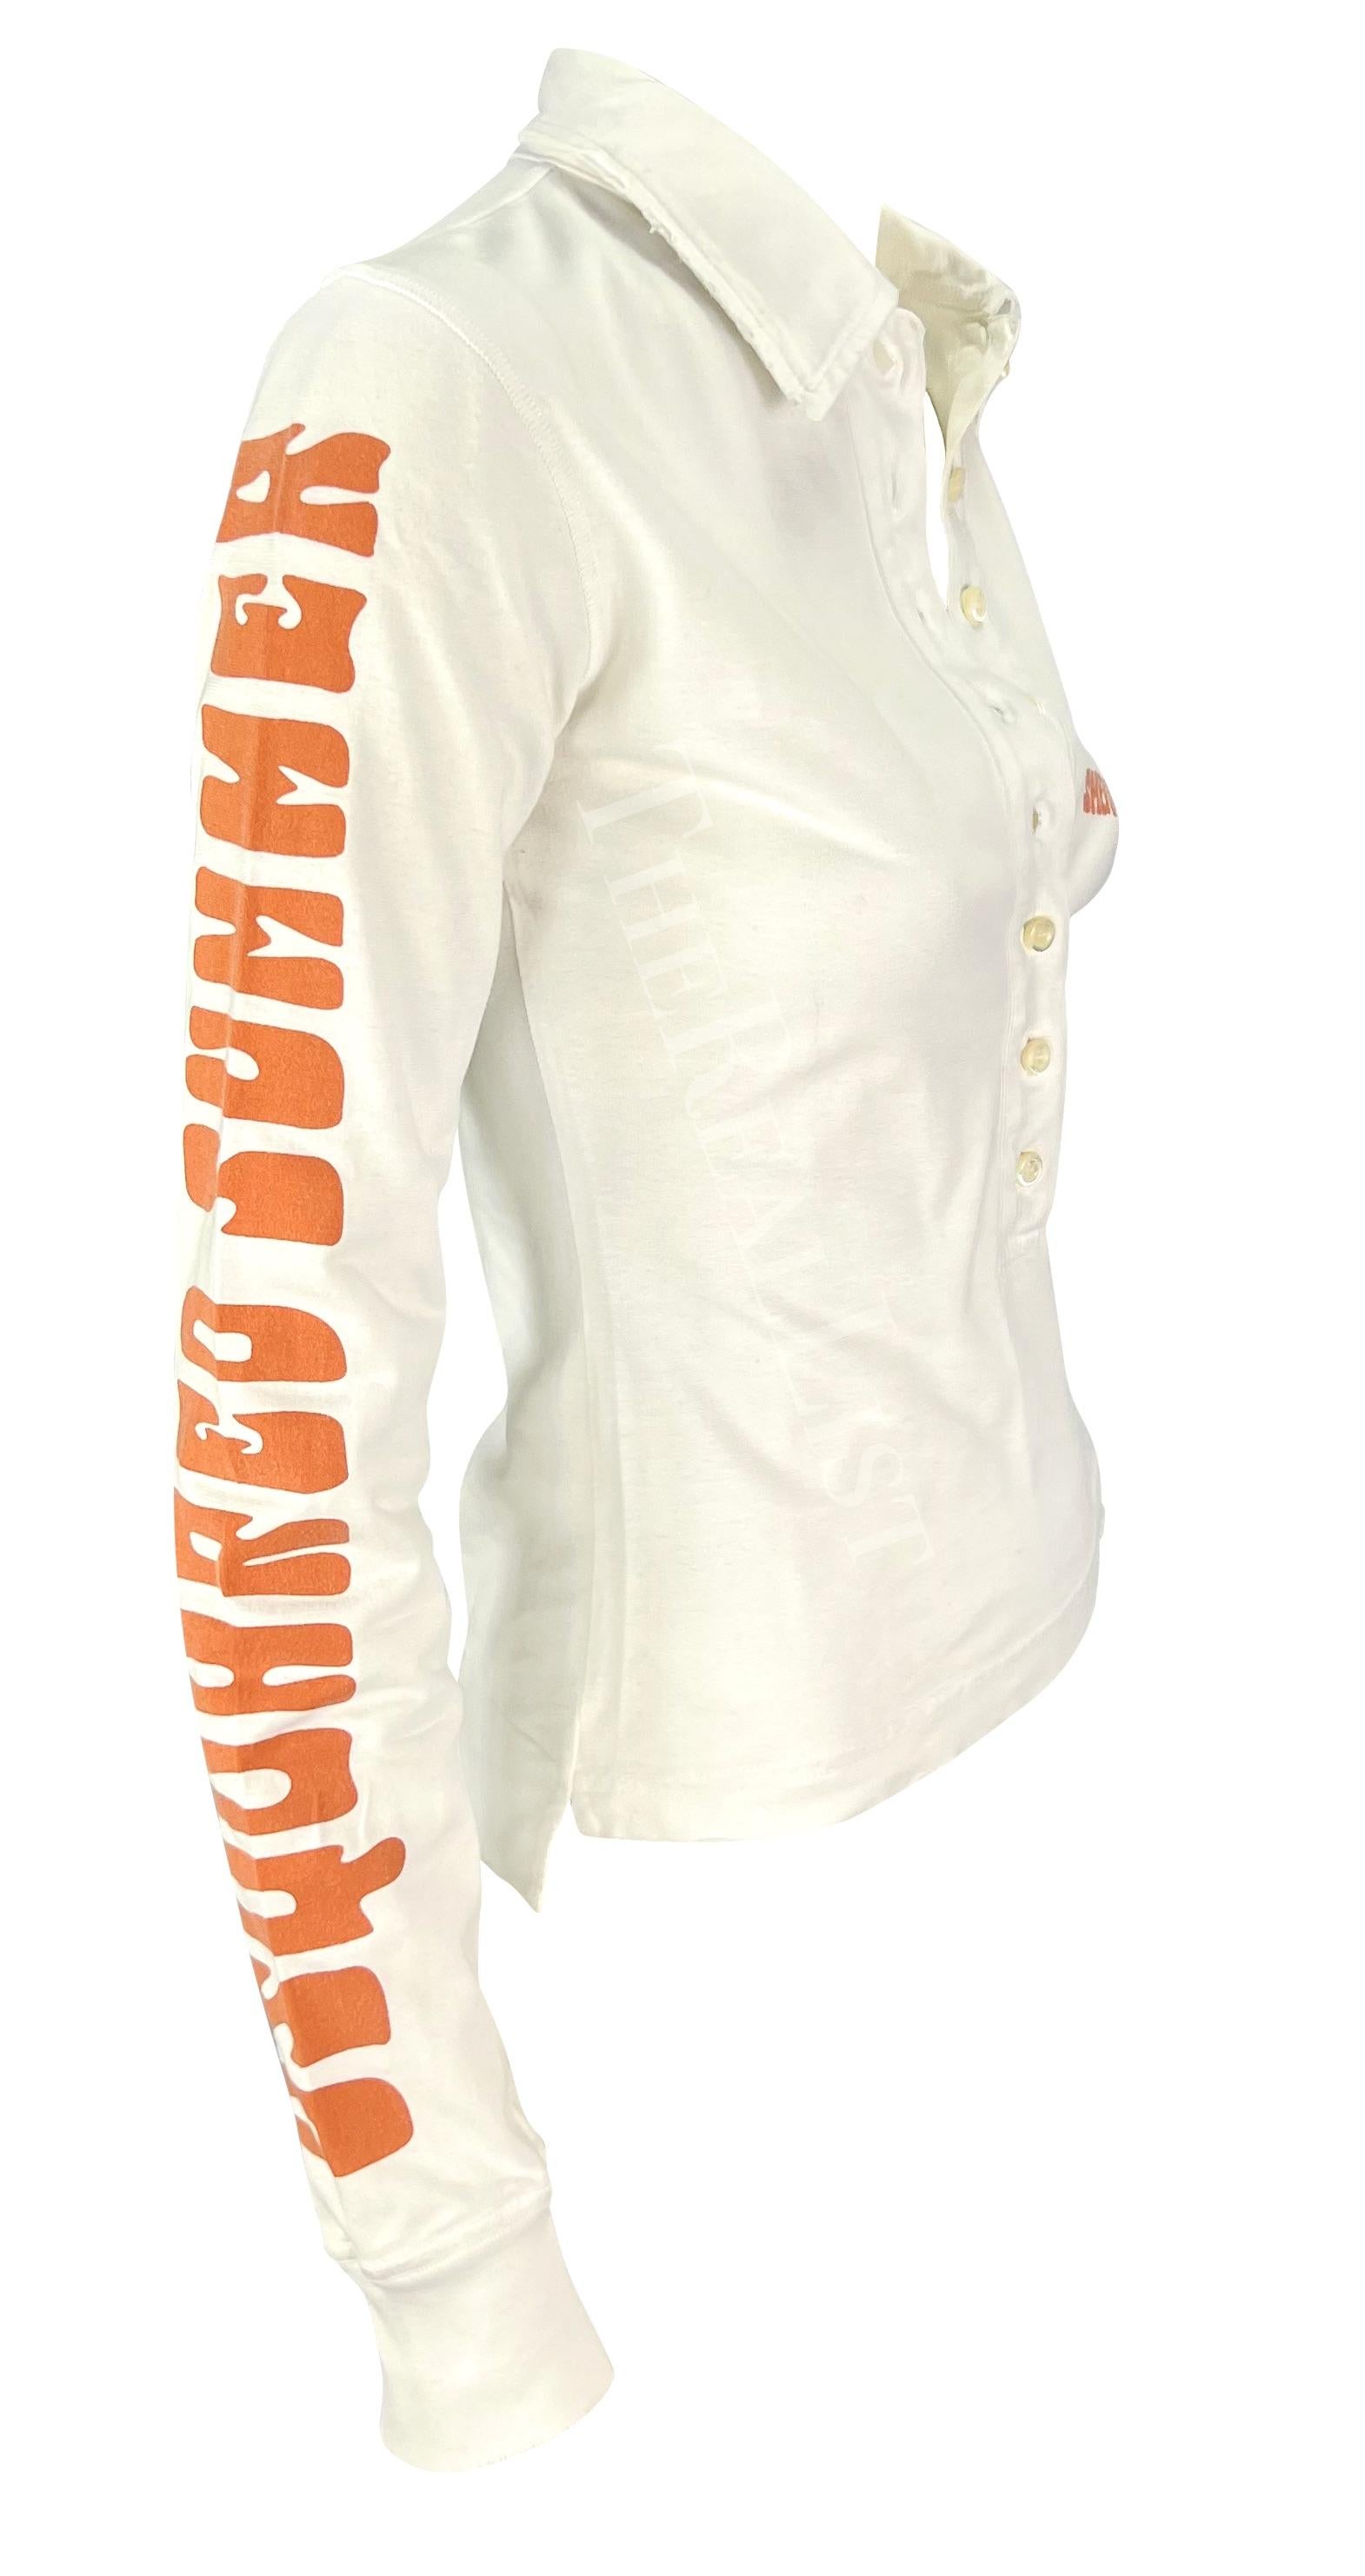 S/S 2005 Dsquared2  'Stoner' Marijuana Smoking White Distressed Rugby Polo Top  For Sale 1